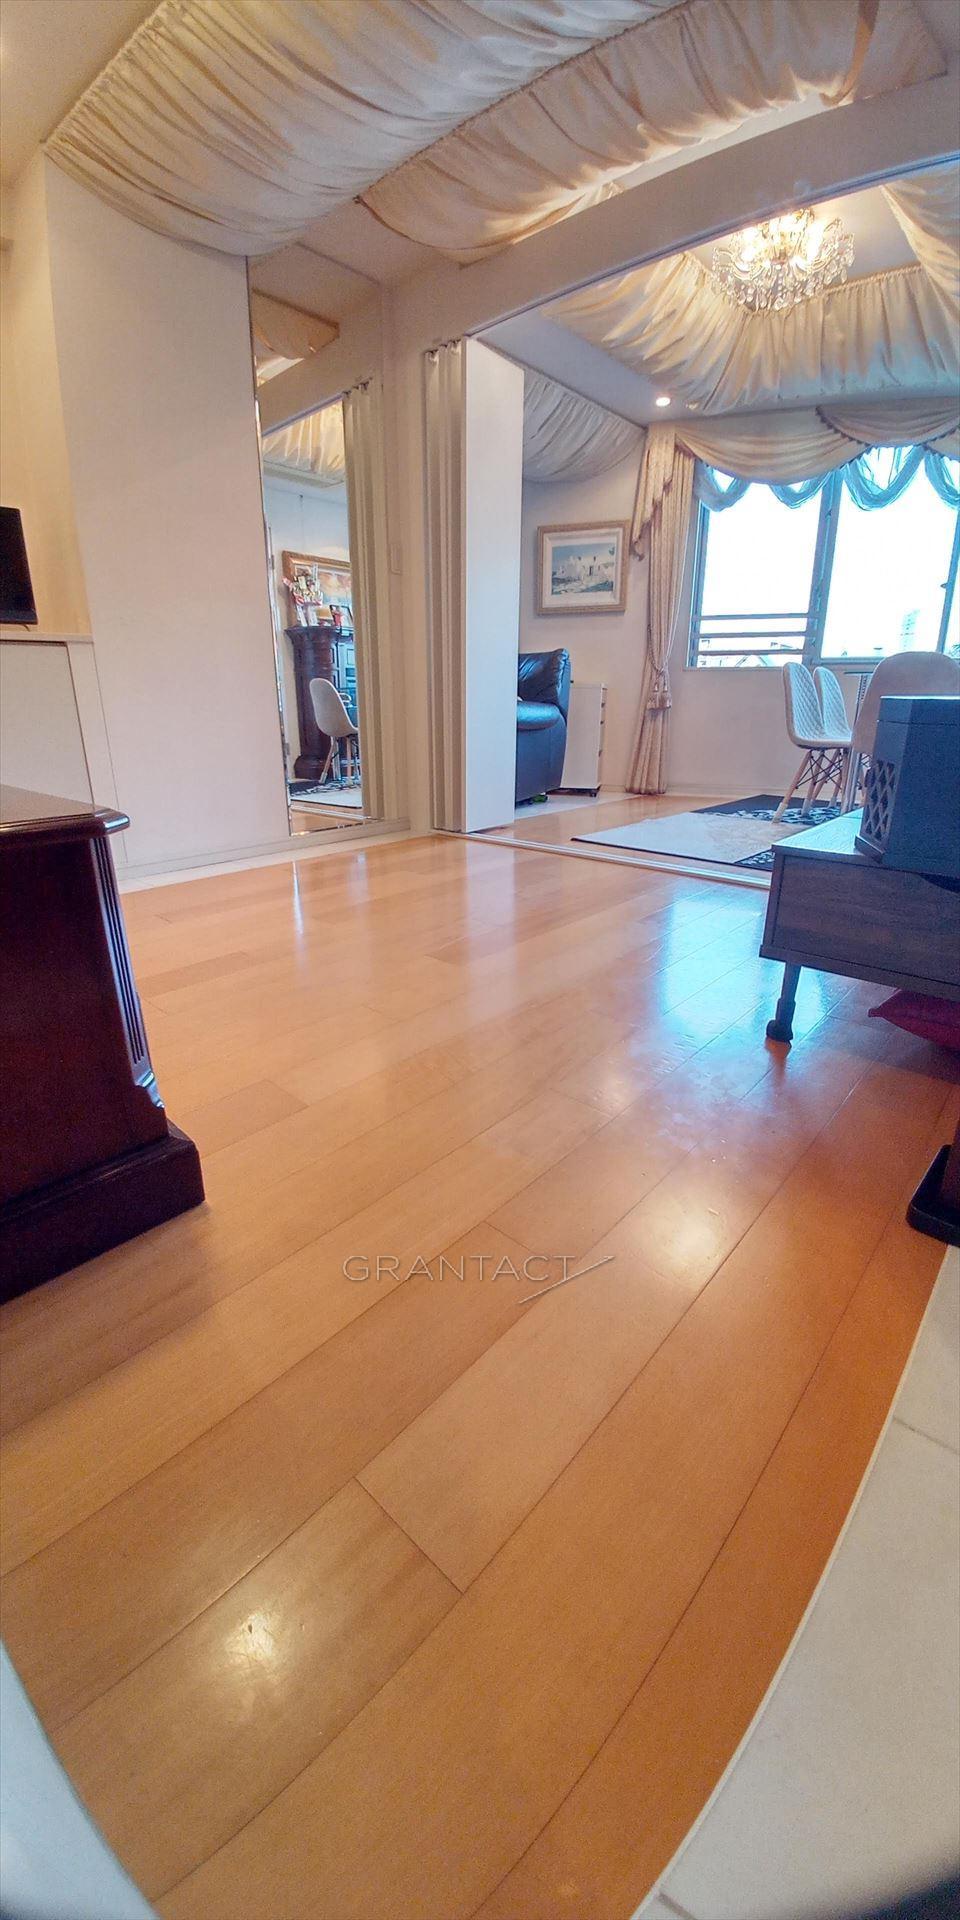 Living dining room（10.8J）・Bedroom（7.3J）*Furniture and furnishing are not for sale